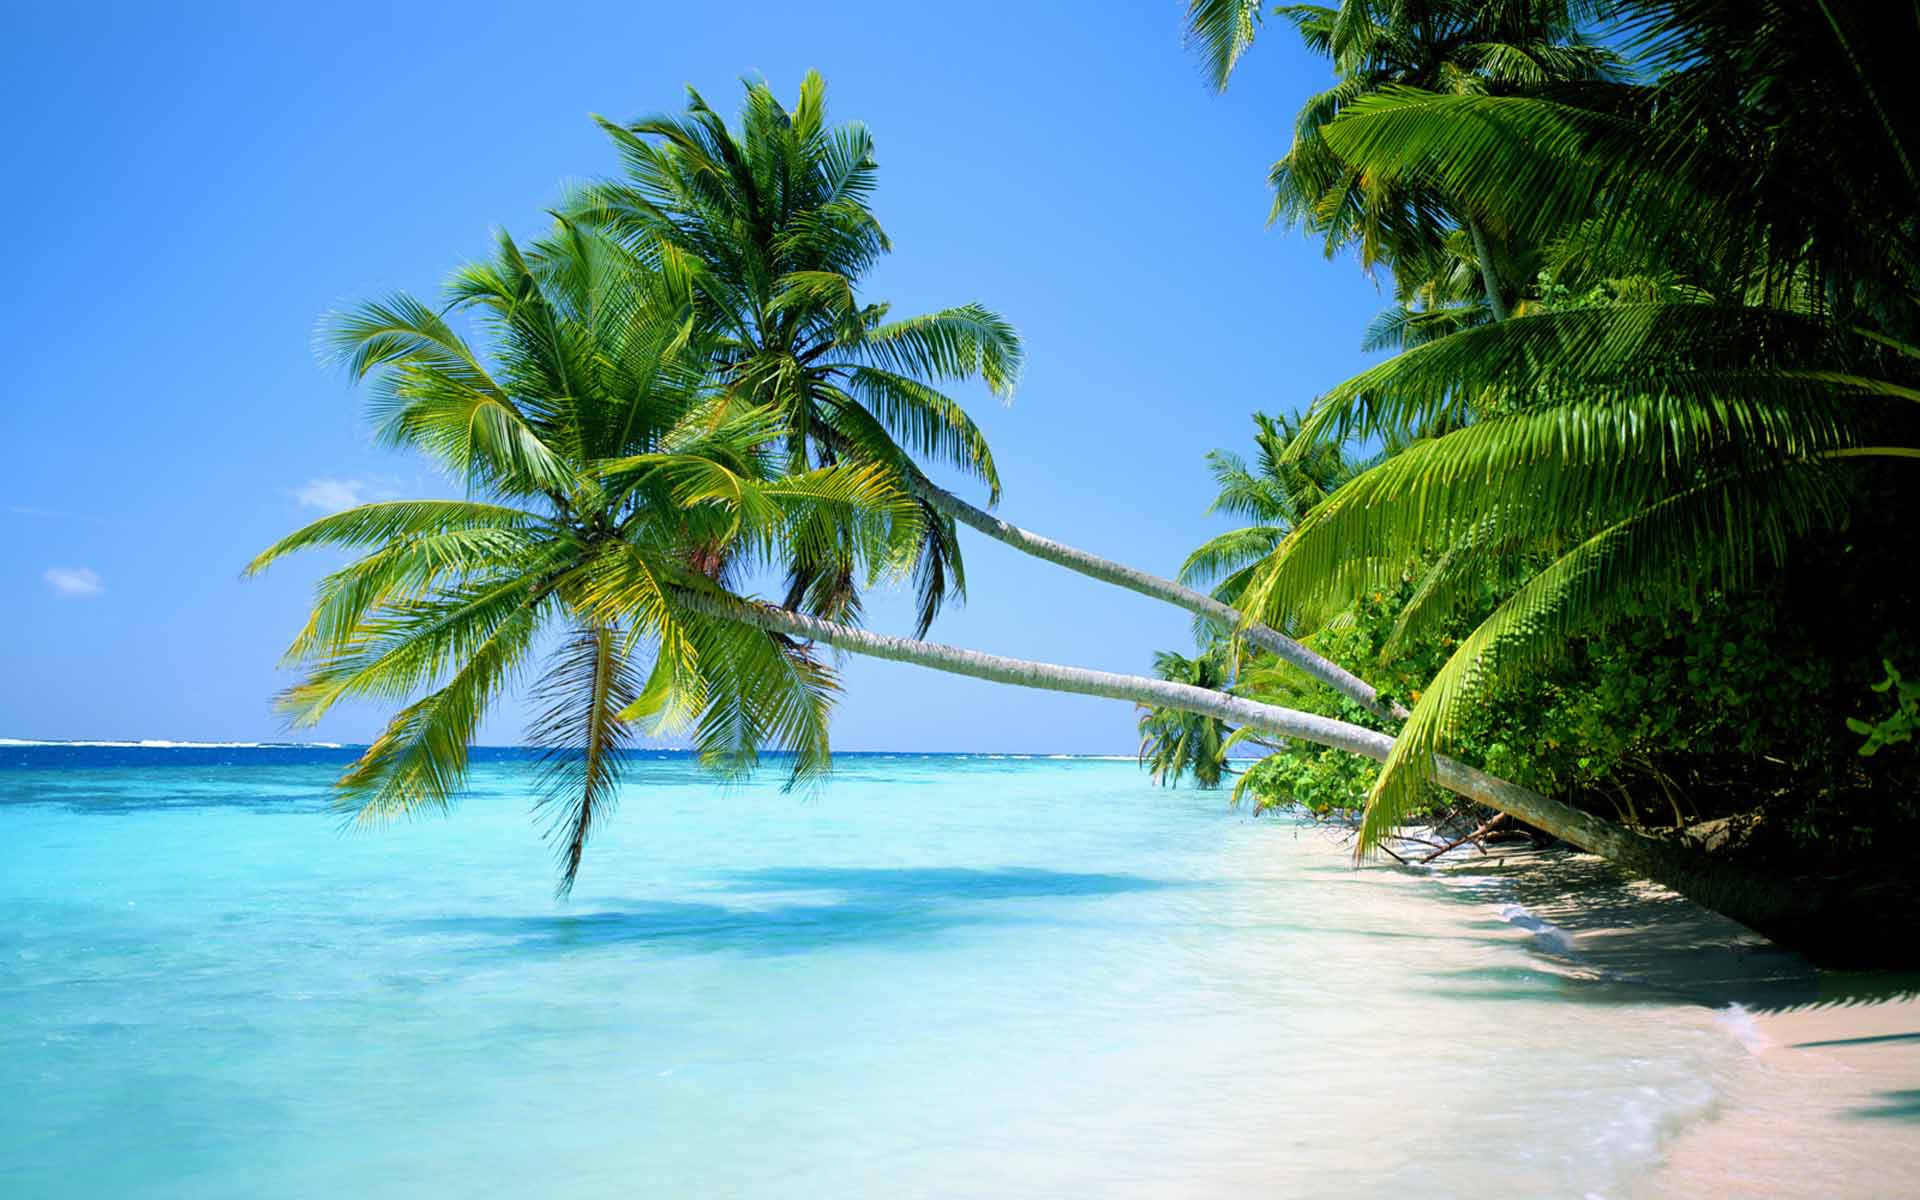 Tropical Beach Wallpapers Widescreen 2K Pictures 2K Wallpapers